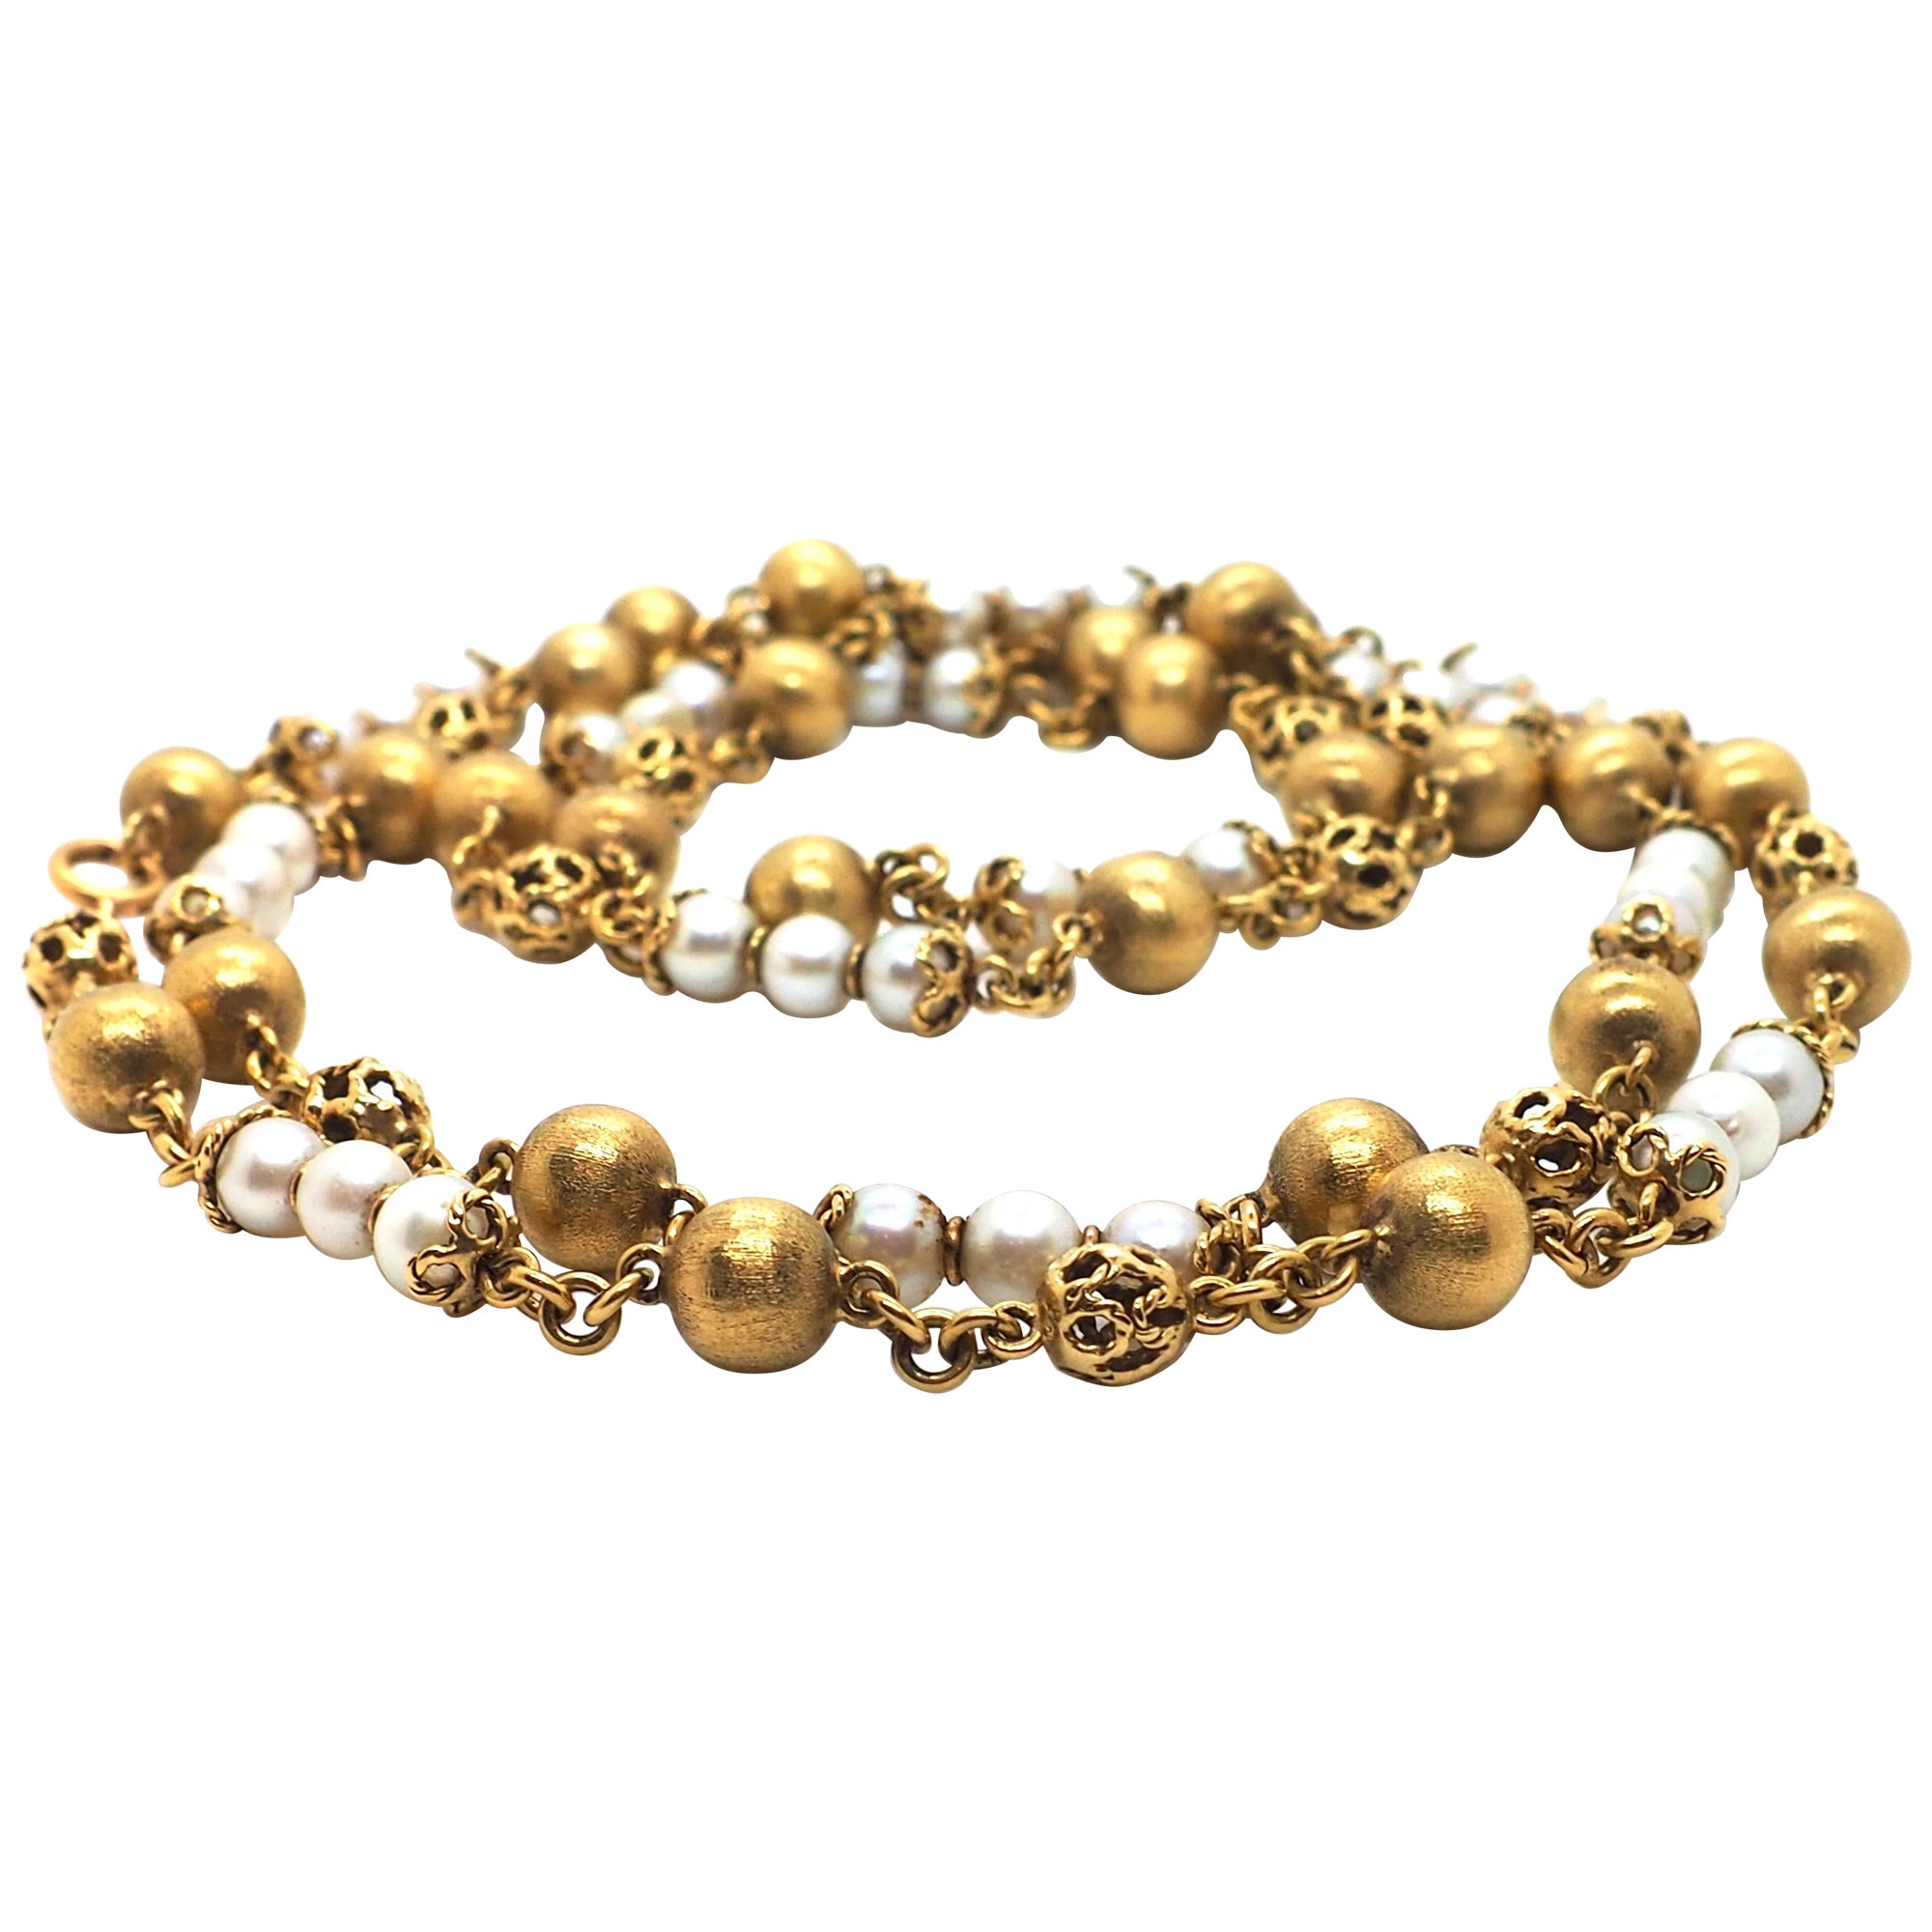 Elegant Beaded Necklace in 18K Yellow Gold, Adorned with 39 Handpicked Pearls